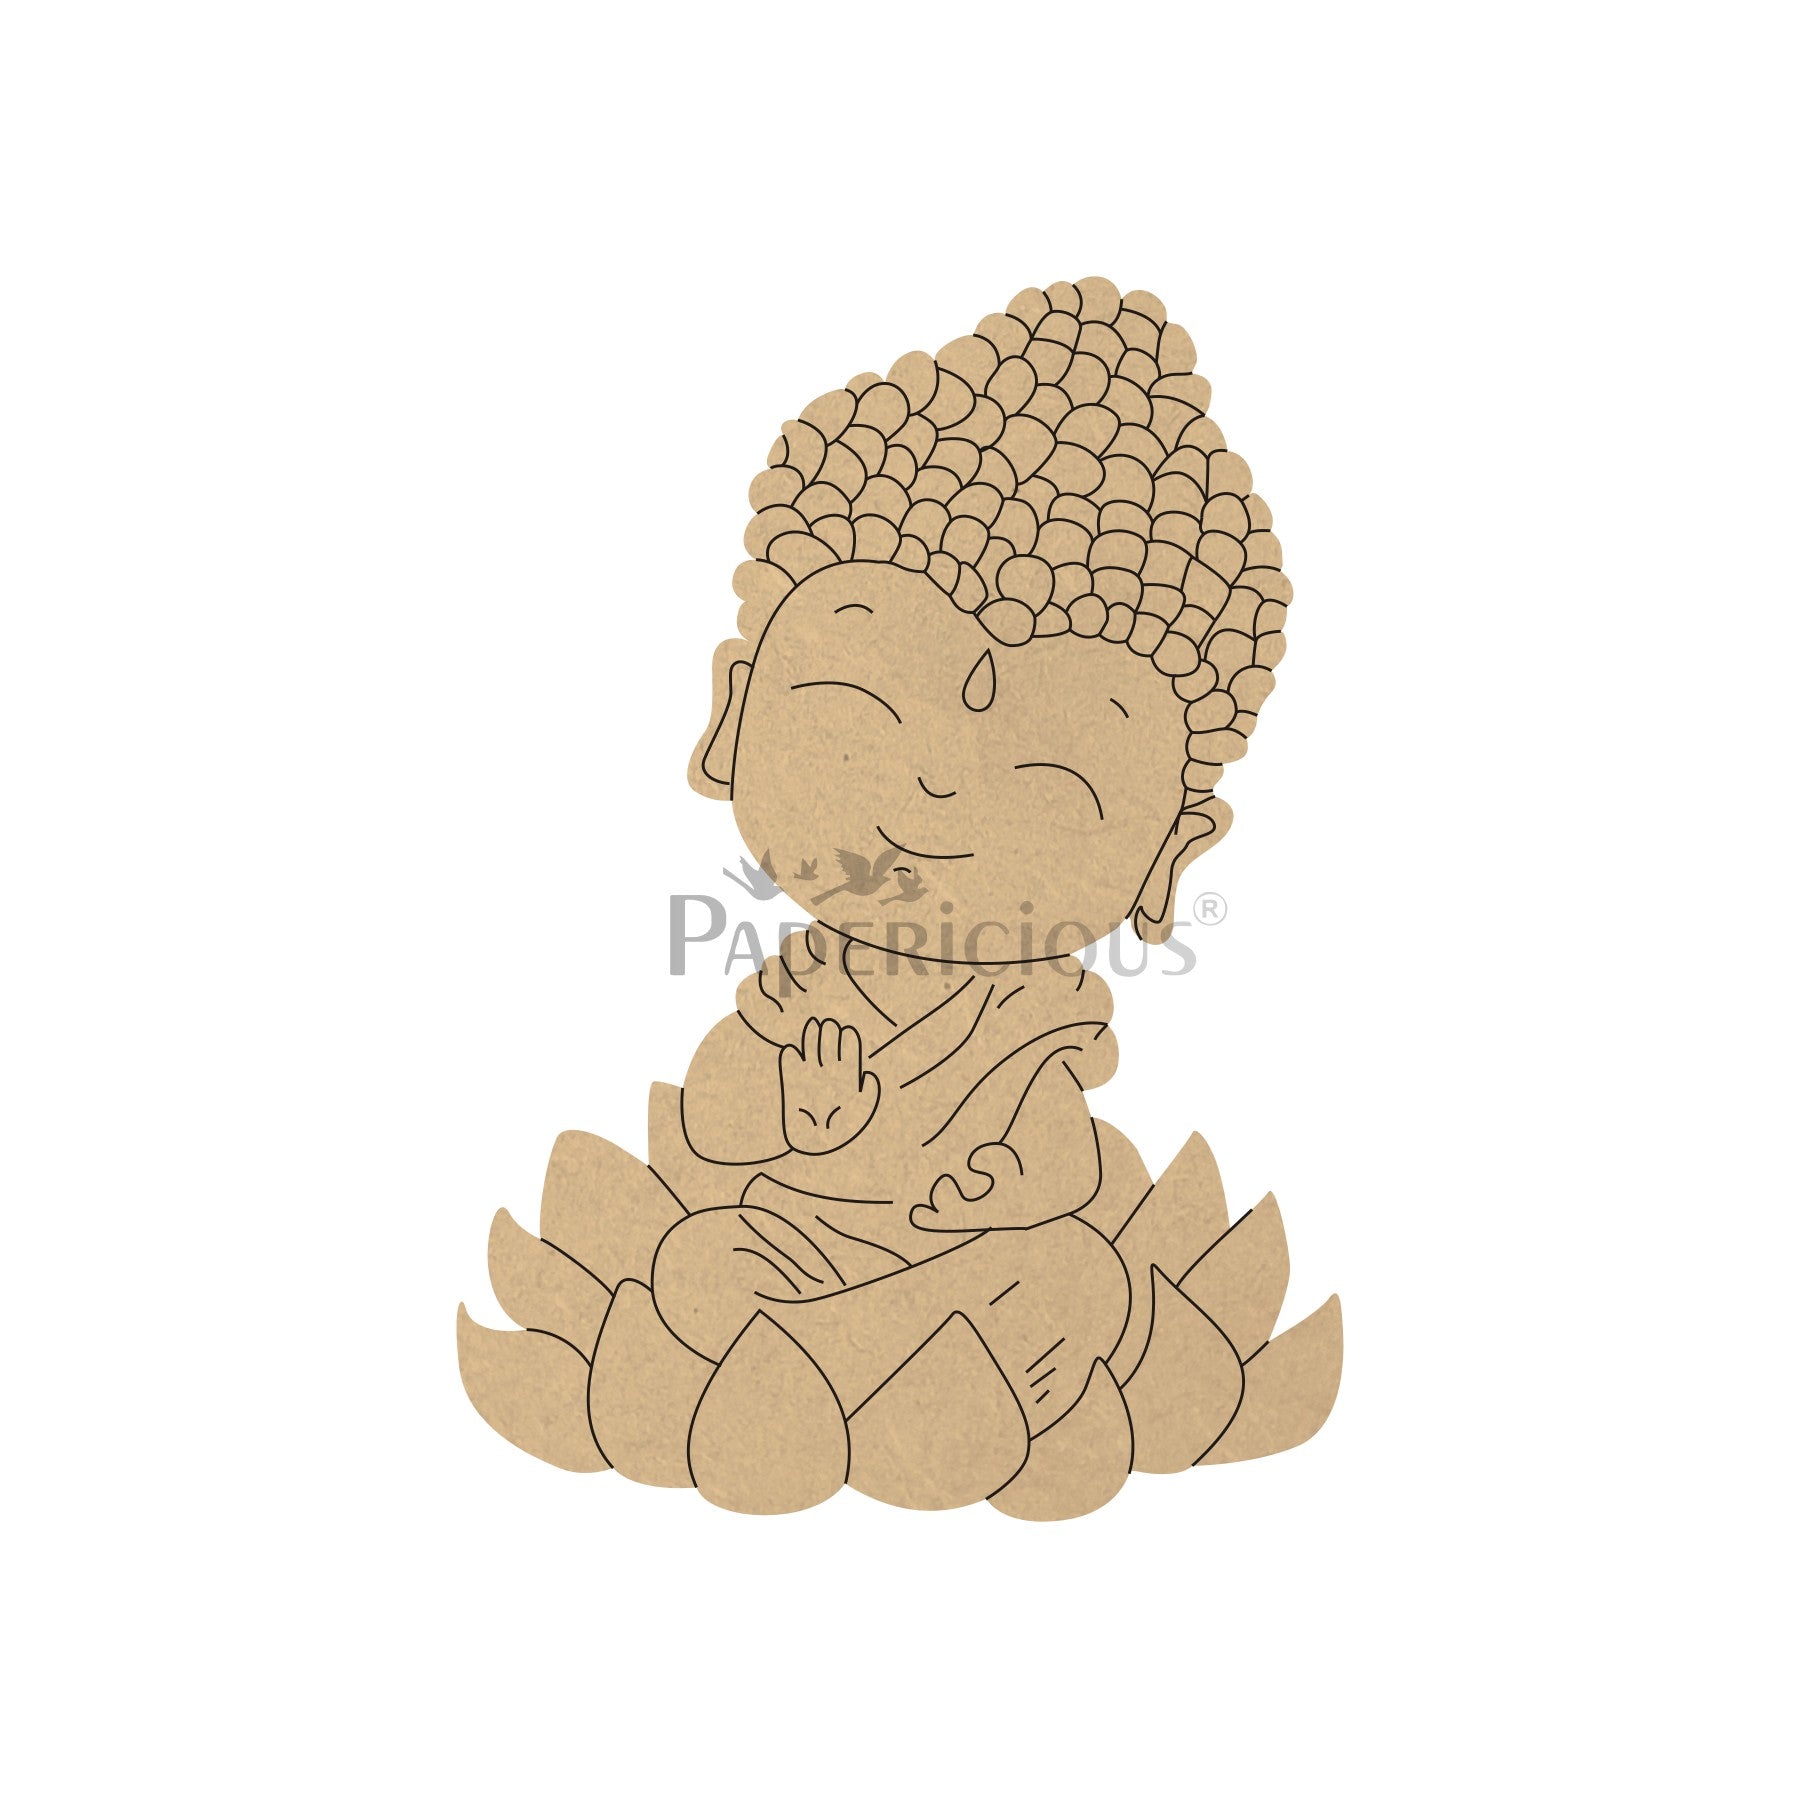 PAPERICIOUS 4mm thick Pre Marked MDF Base Little Buddha